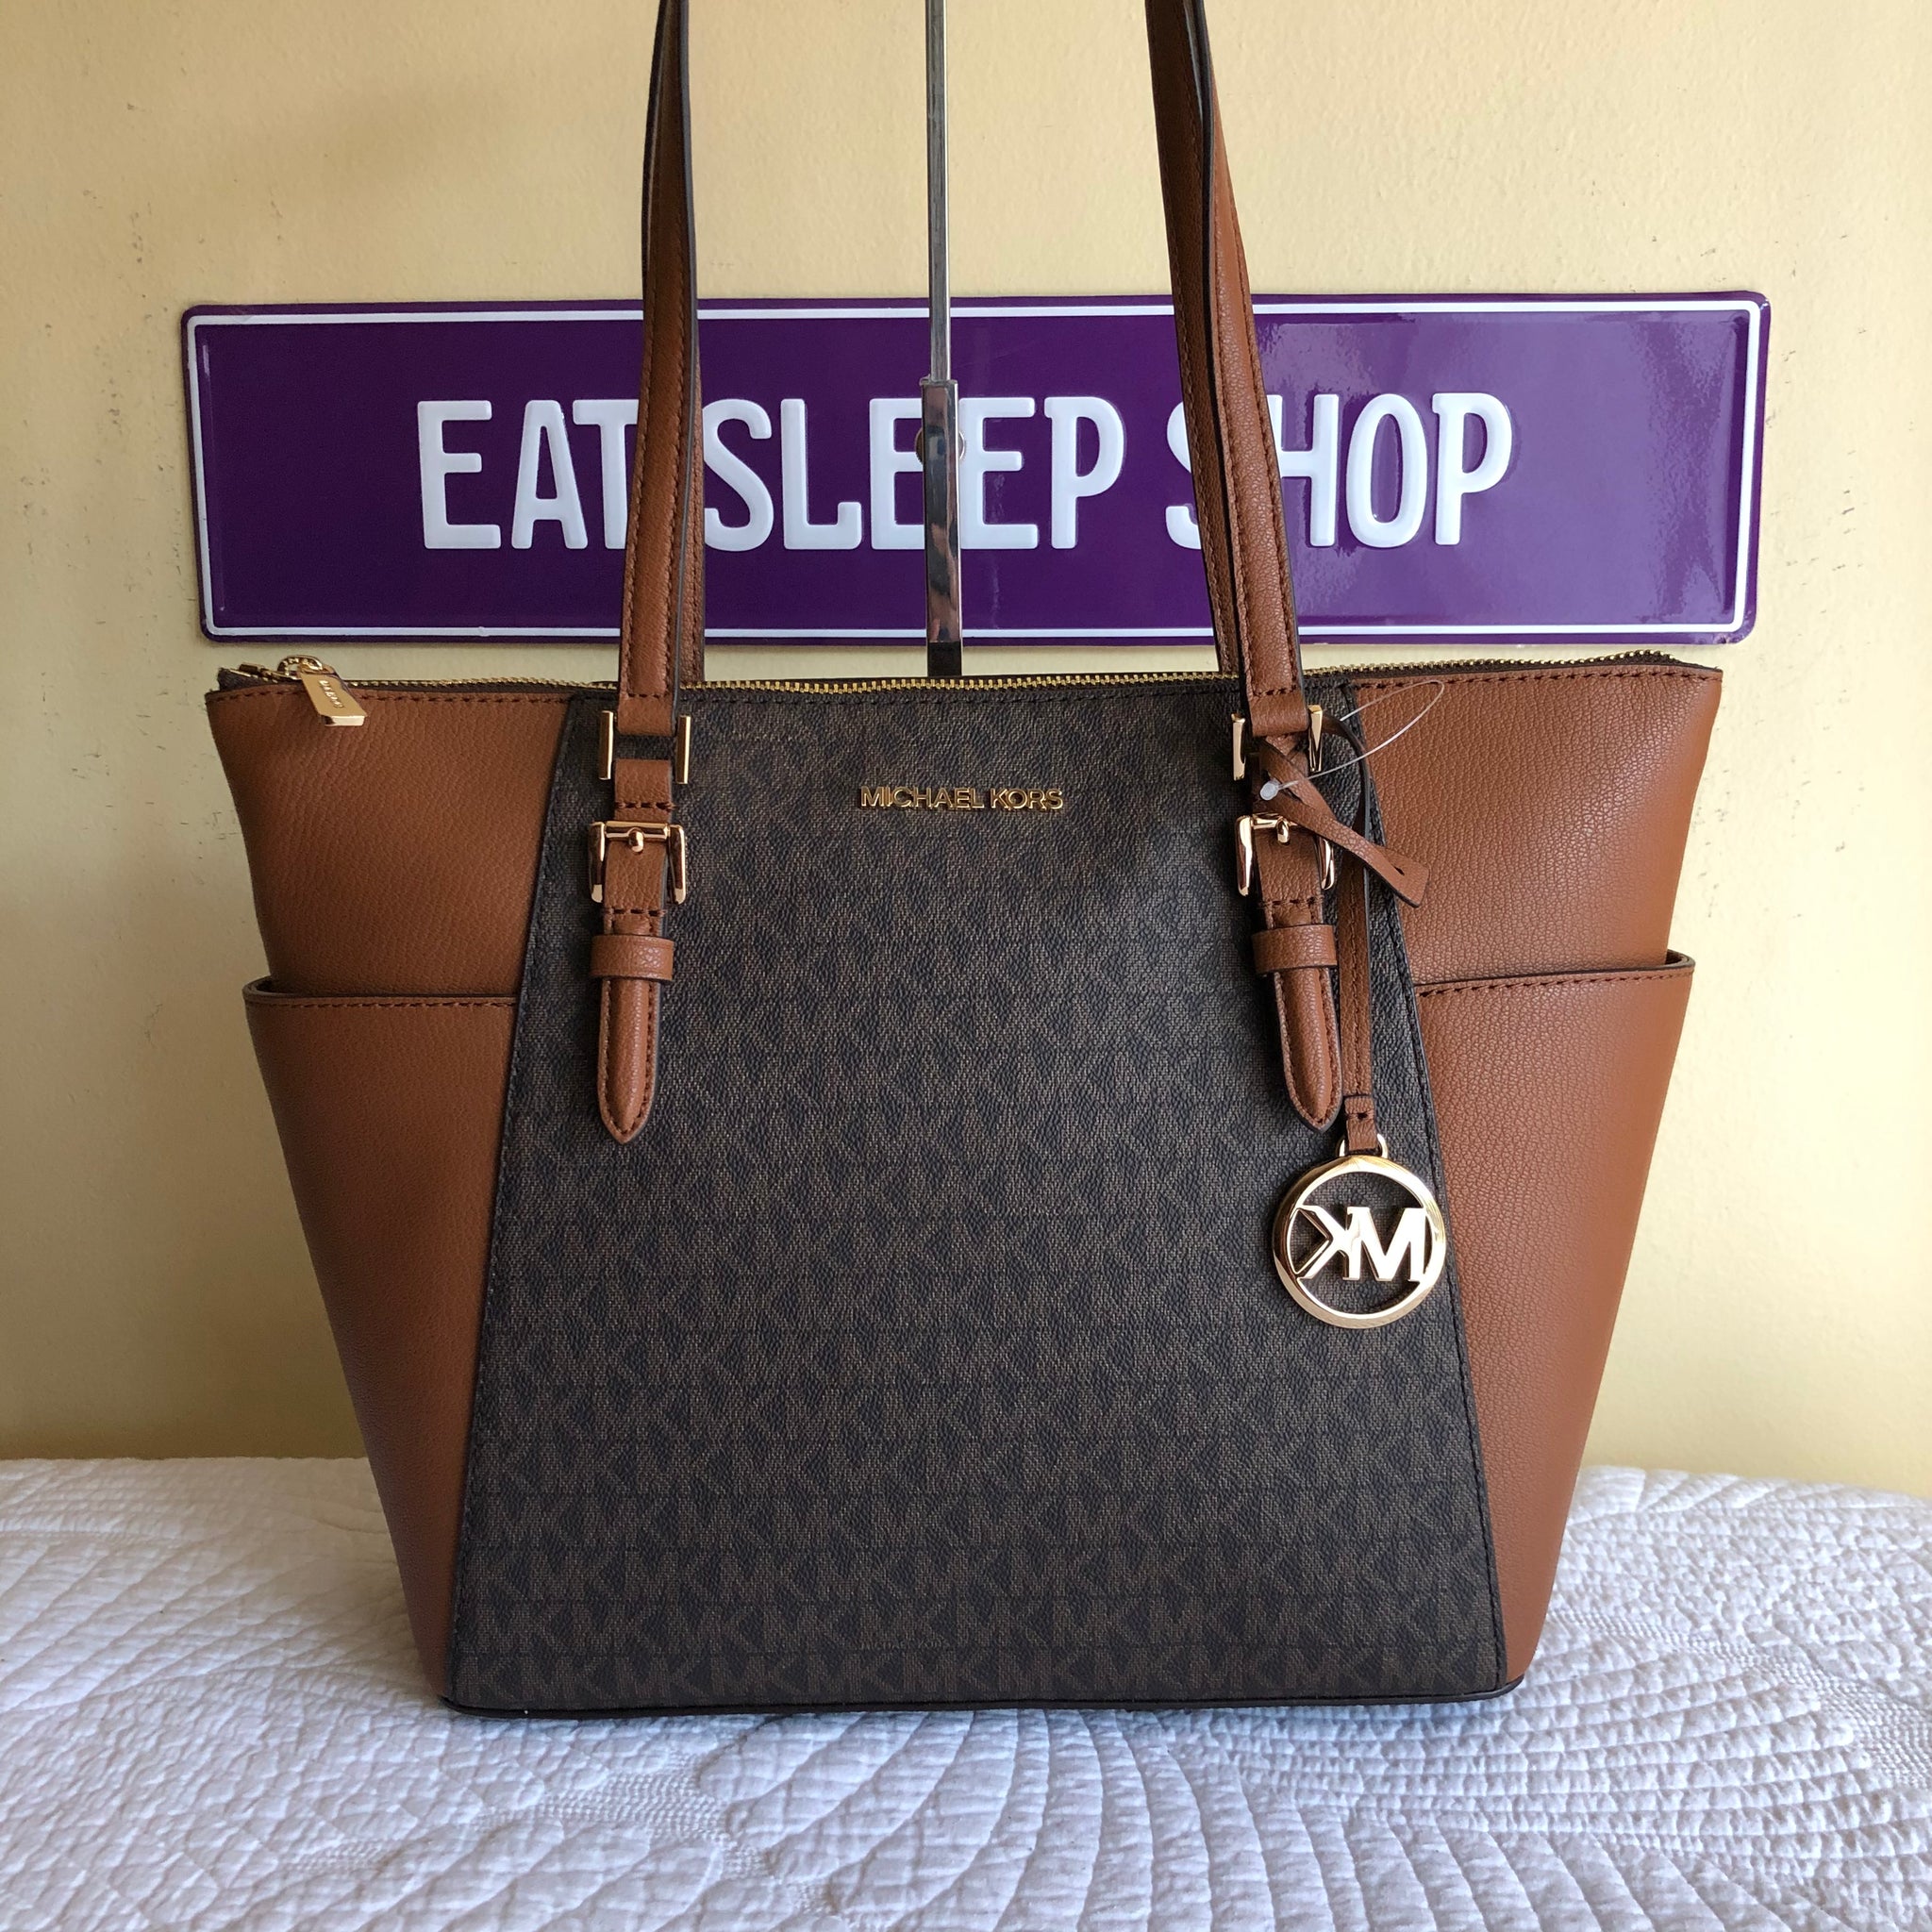 Michael Kors Charlotte Large Leather Top-Zip Tote